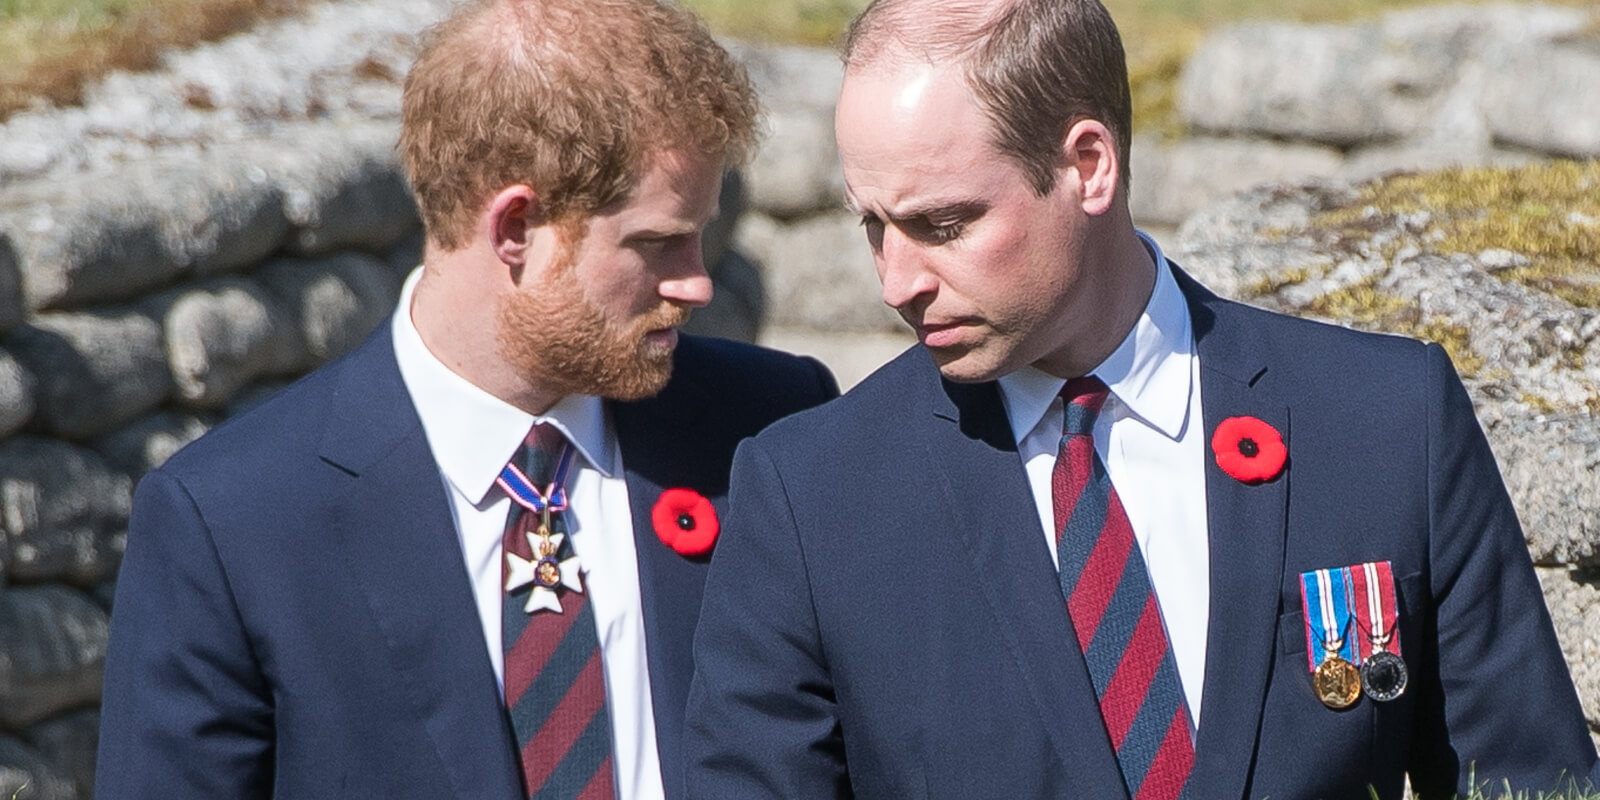 Prince Harry and Prince William photographed at the commemorations for the 100th anniversary of the battle of Vimy Ridge on April 9, 2017 in Lille, France.